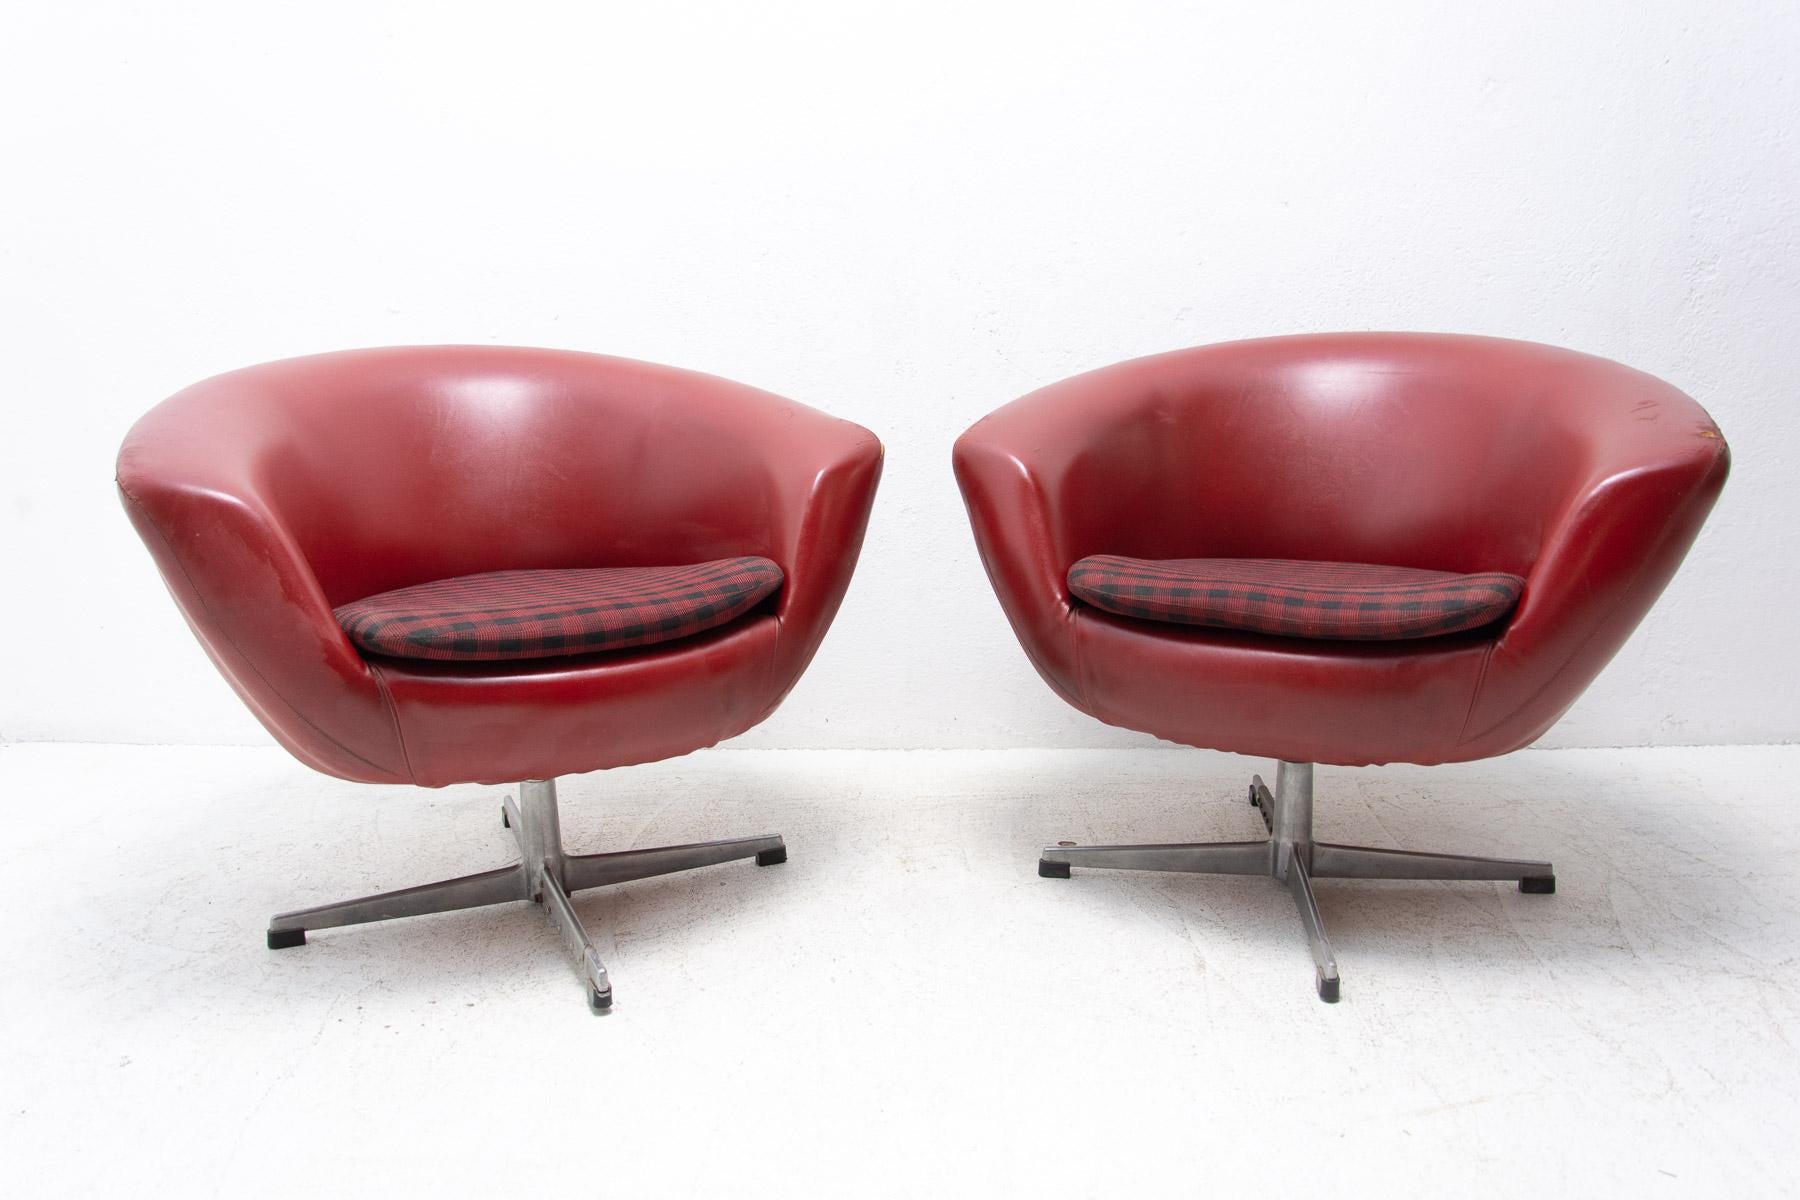 A pair of 1970’s swivel chairs manufactured by the famous UP Zavody company. This type of chairs is characterized by their innovative molded expanded construction which provide an extremely lightweight and durable design. The iconic chair features a